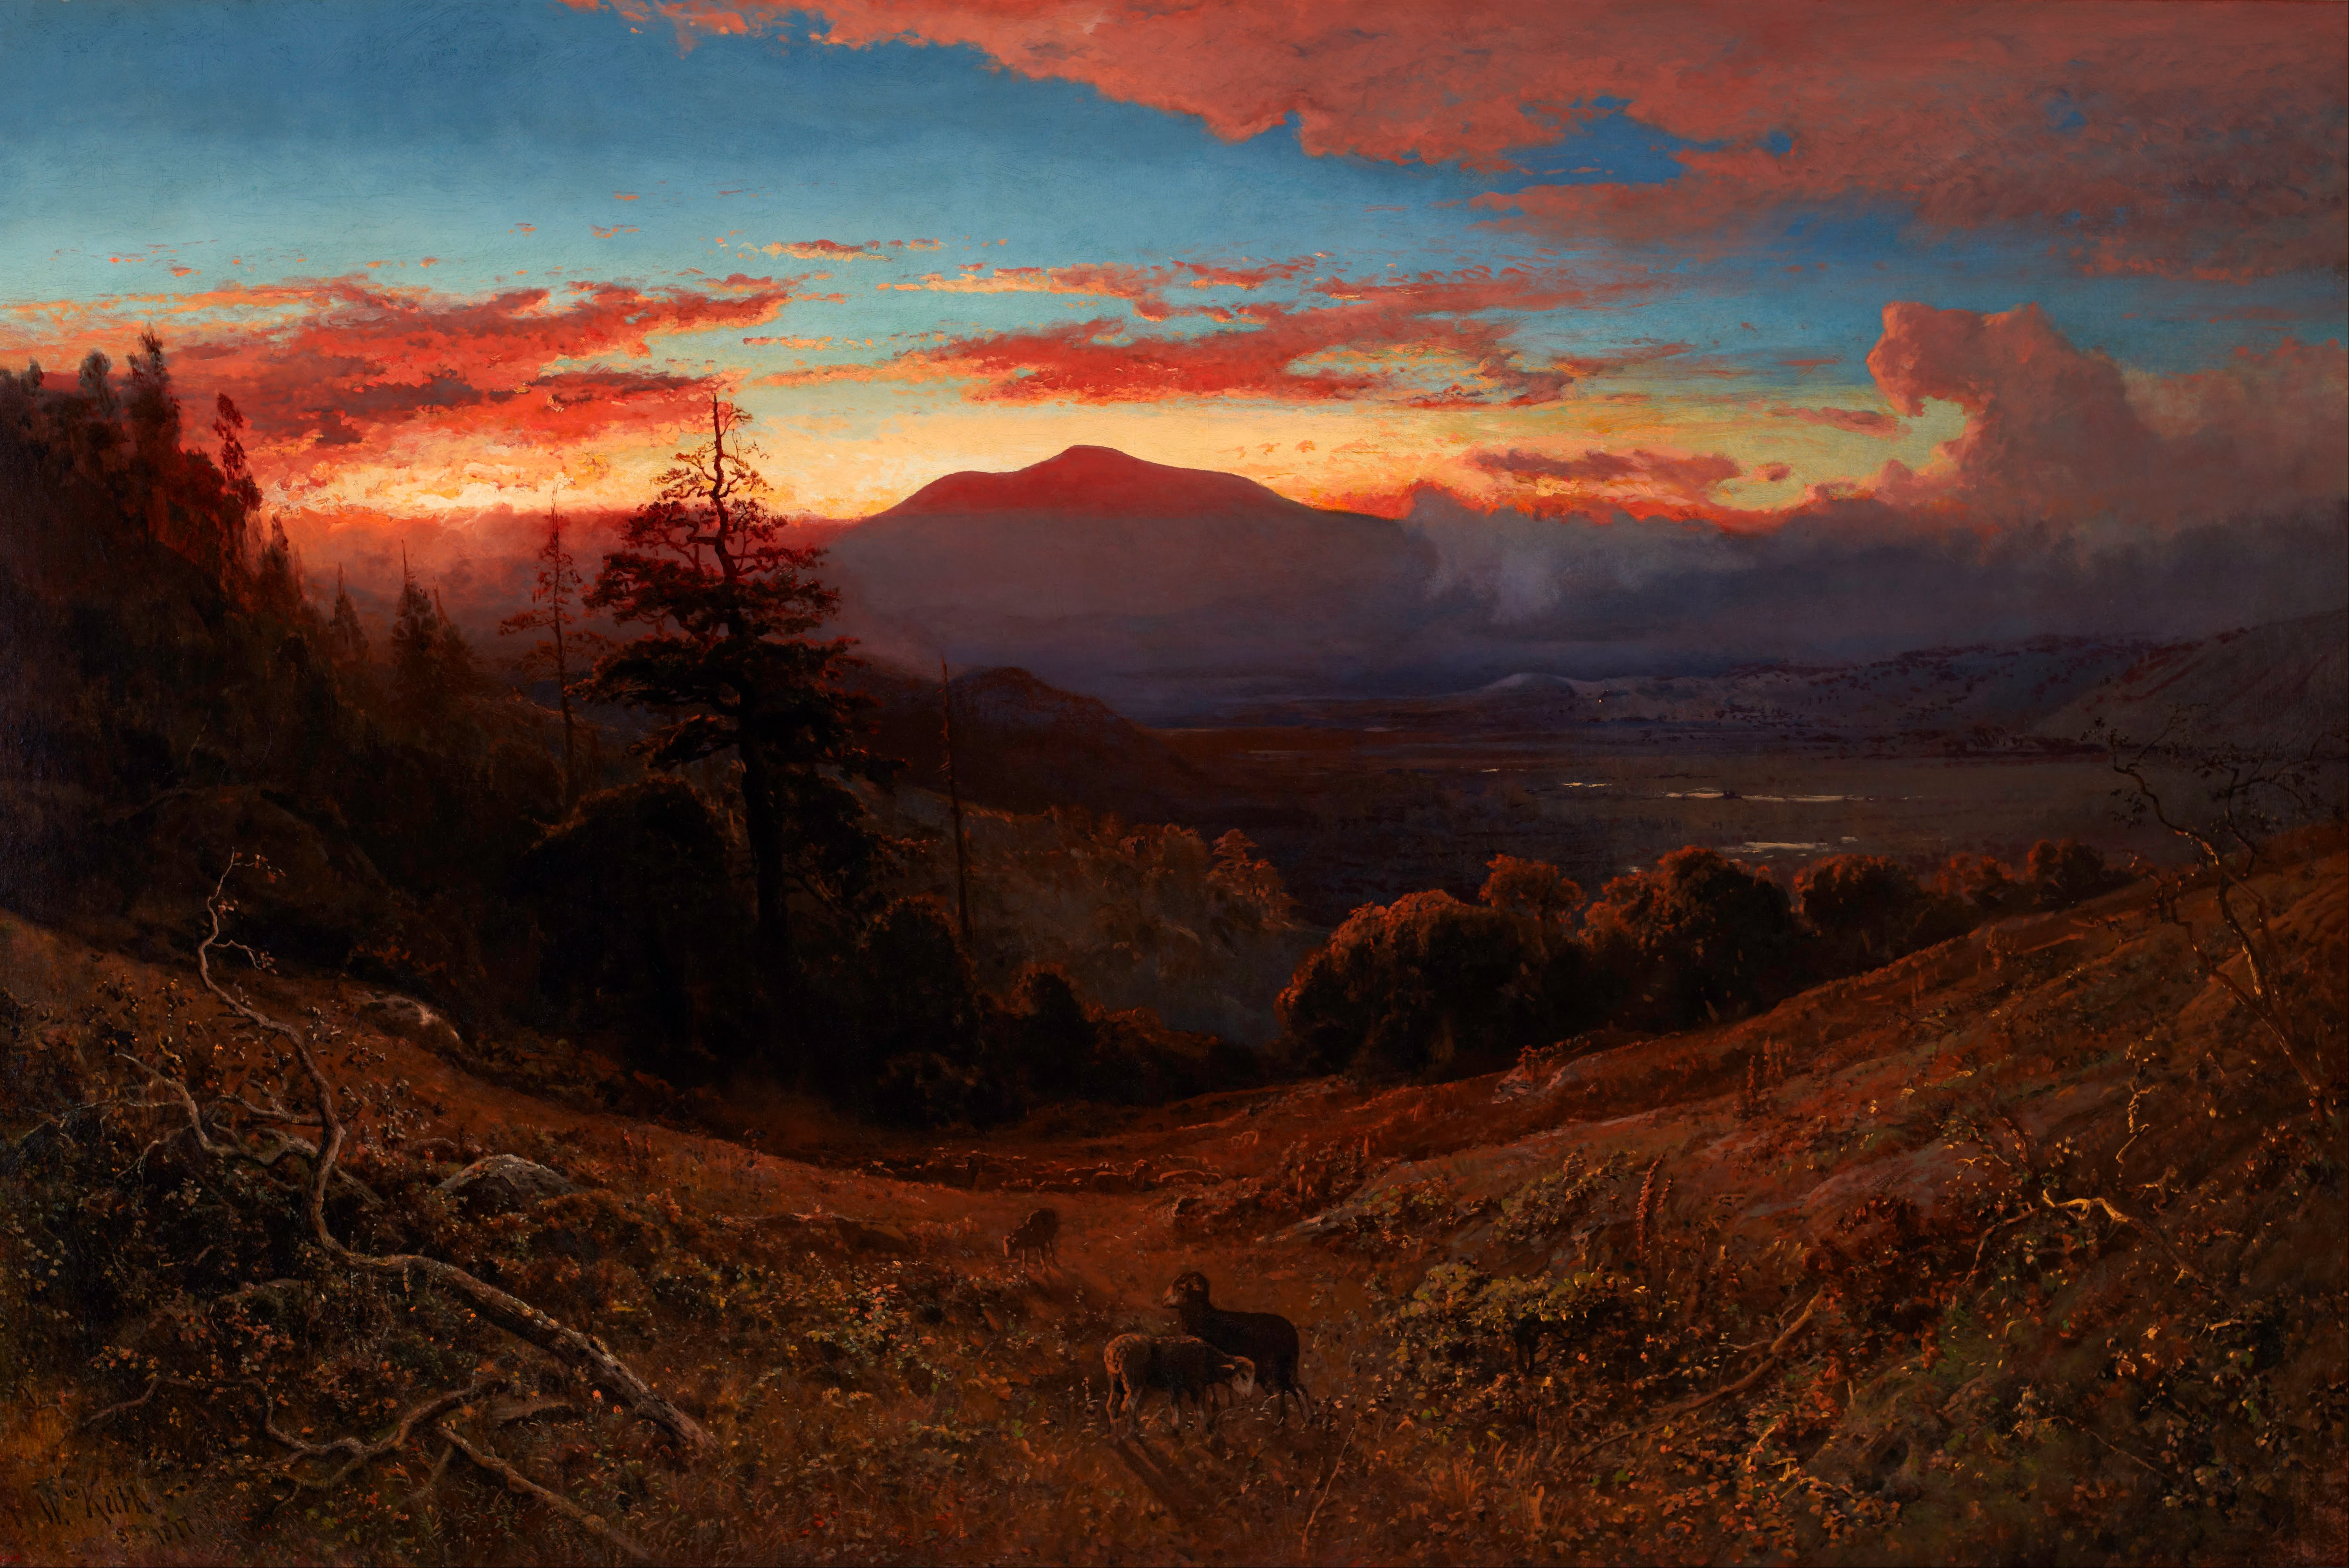 Sunset on Mount Diablo by William Keith - 1877 - 59 x 39 in Cantor Arts Center at Stanford University